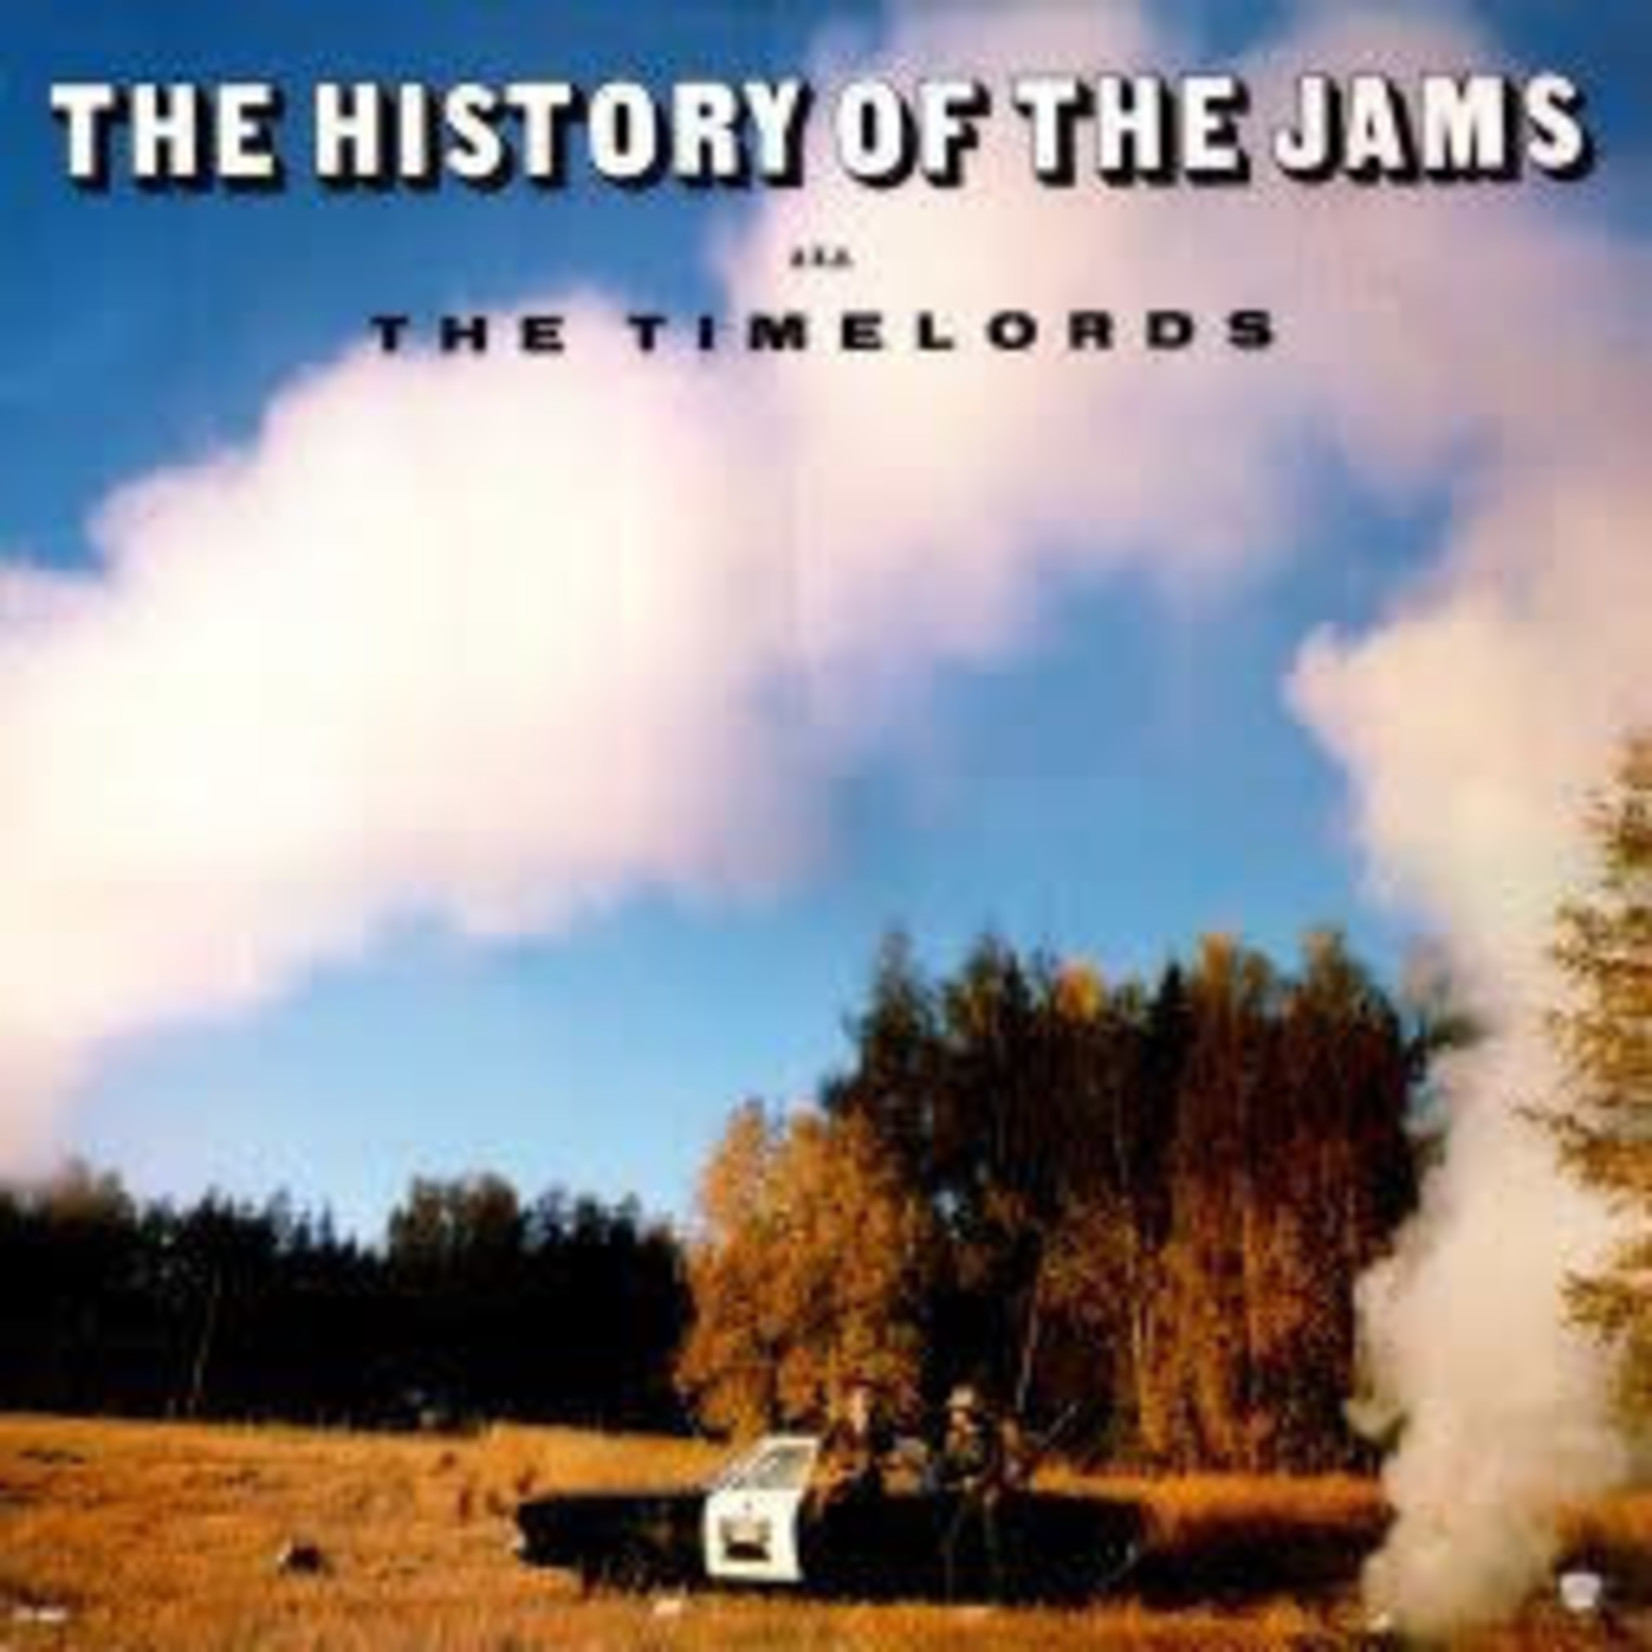 Jams aka The Timelords - The History of The Justified Ancients of Mu Mu aka The Timelords (LP) [1989] {NM/NM}